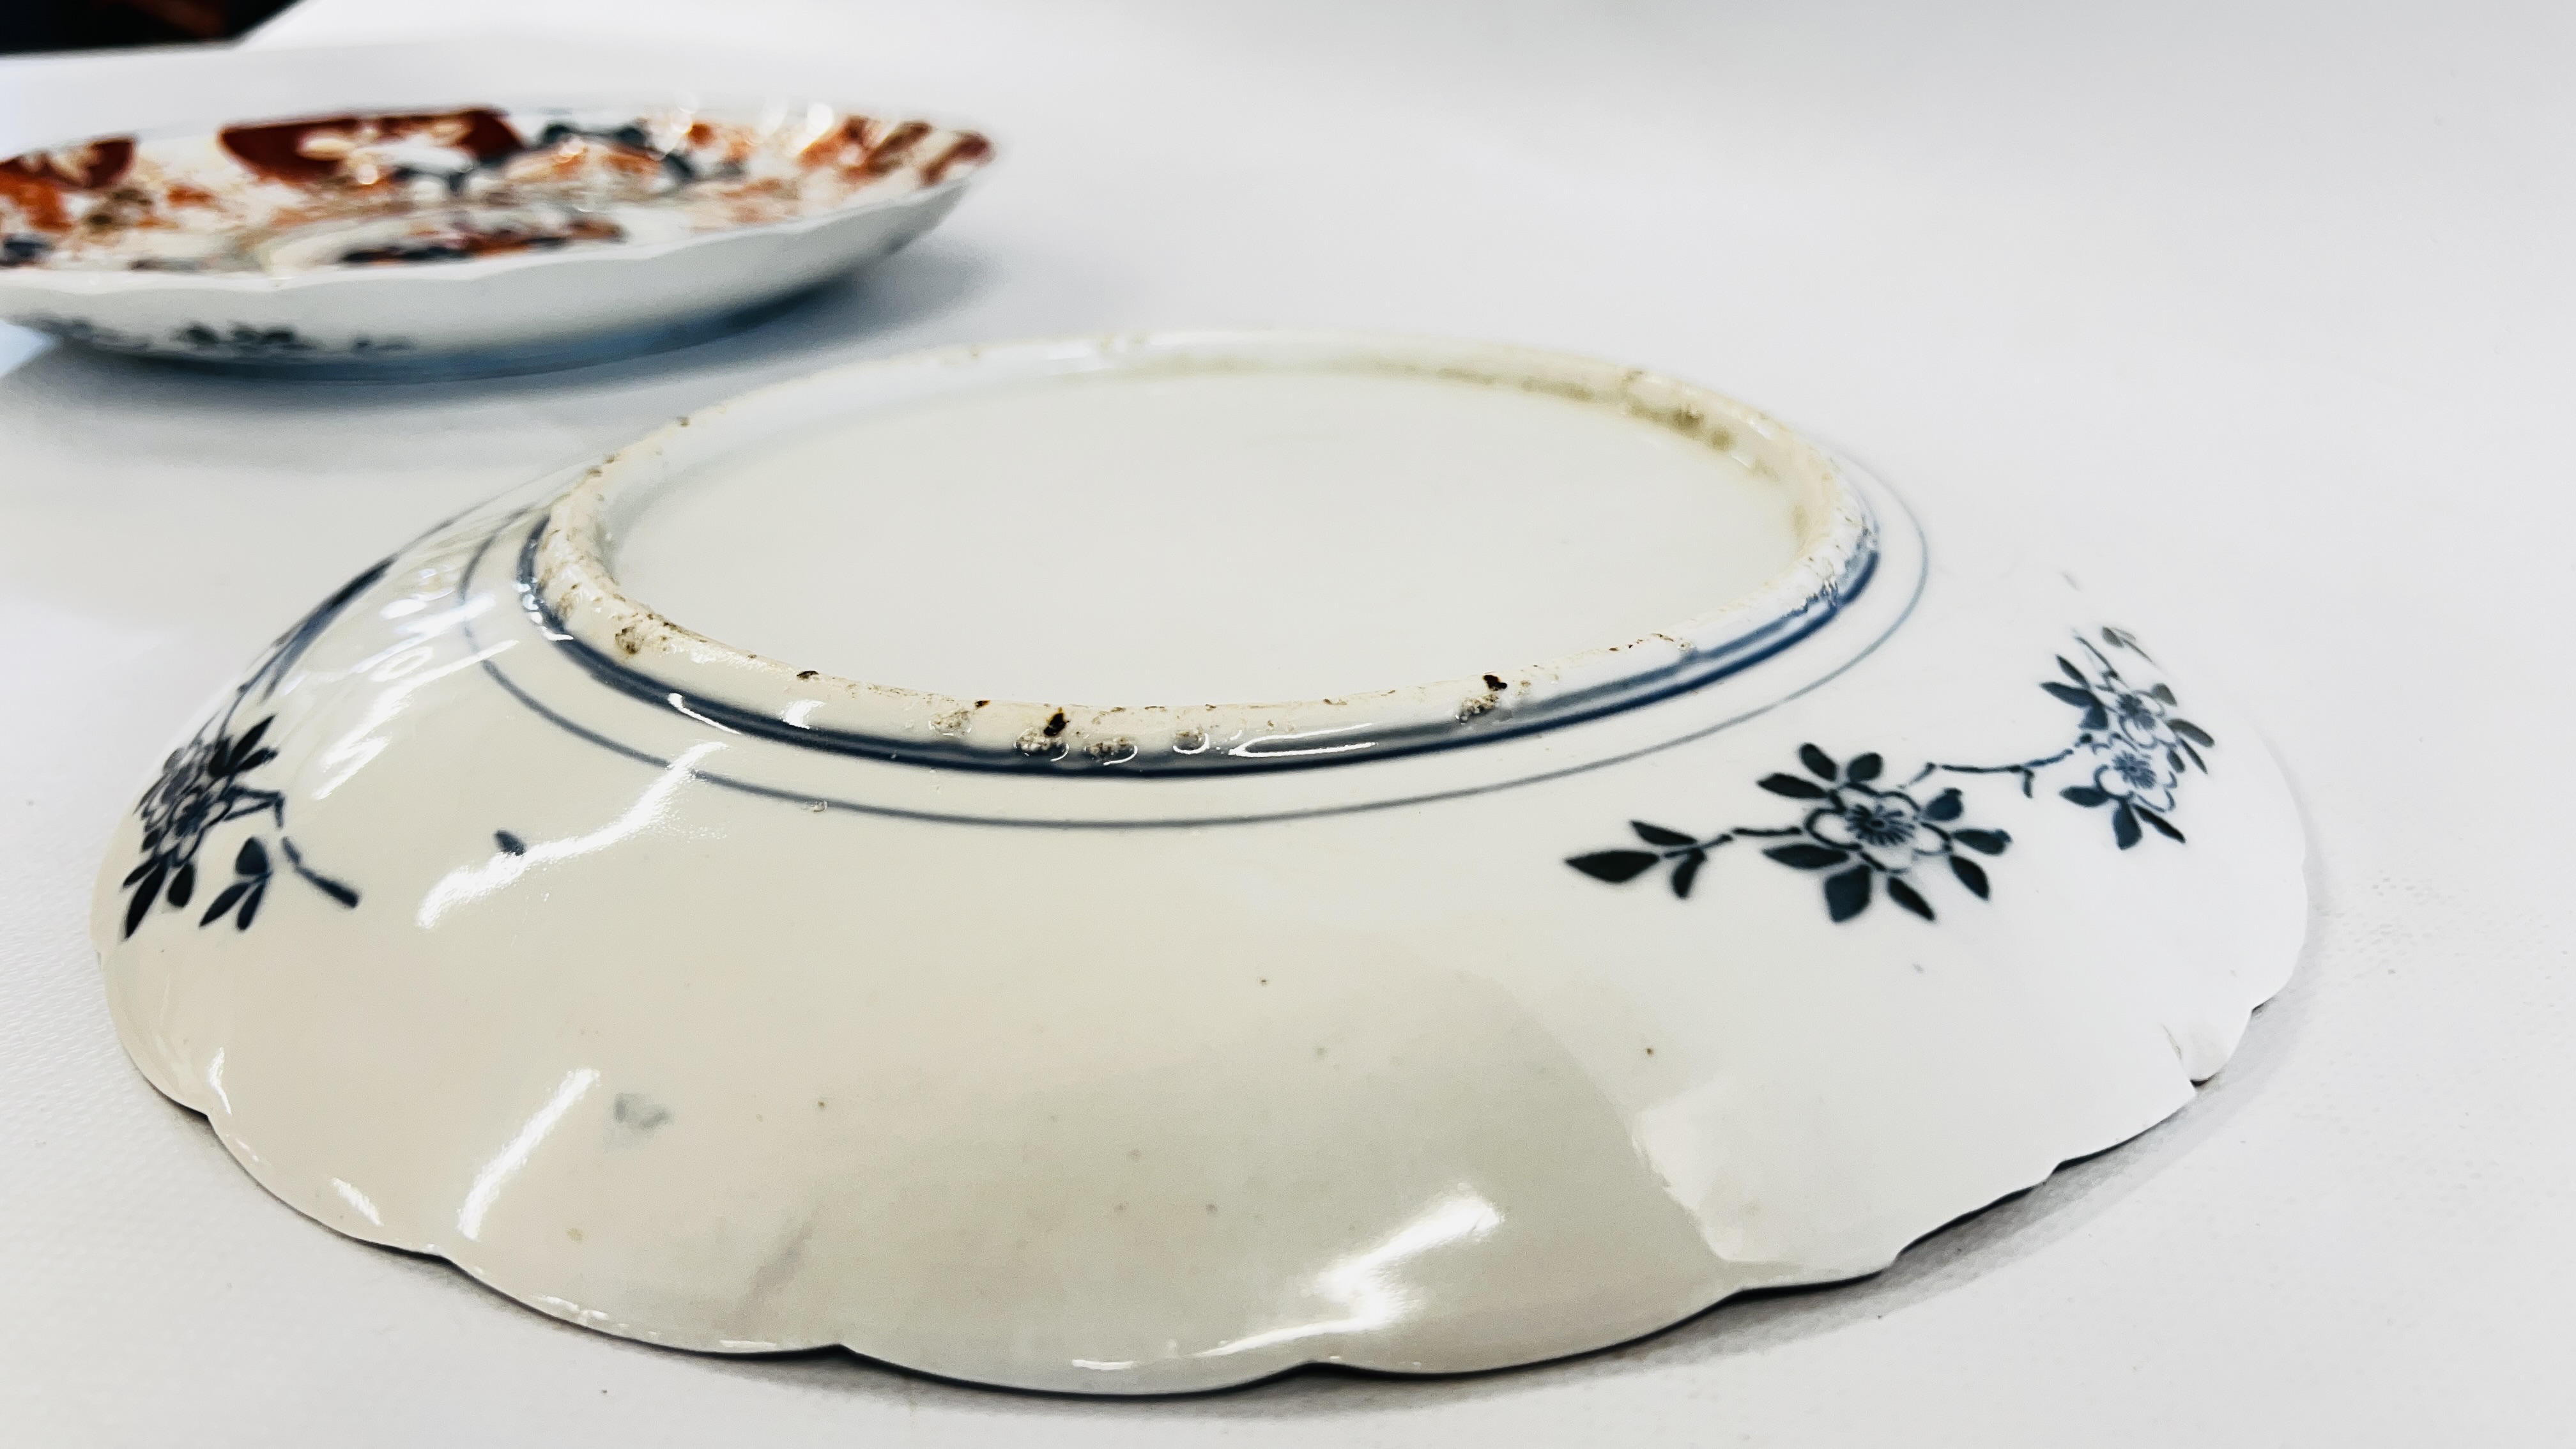 A PAIR OF VINTAGE IMARI PATTERN PLATES - DIAM 28.5CM (RIM CHIP & HAIRLINE CRACK TO ONE EXAMPLE). - Image 5 of 6